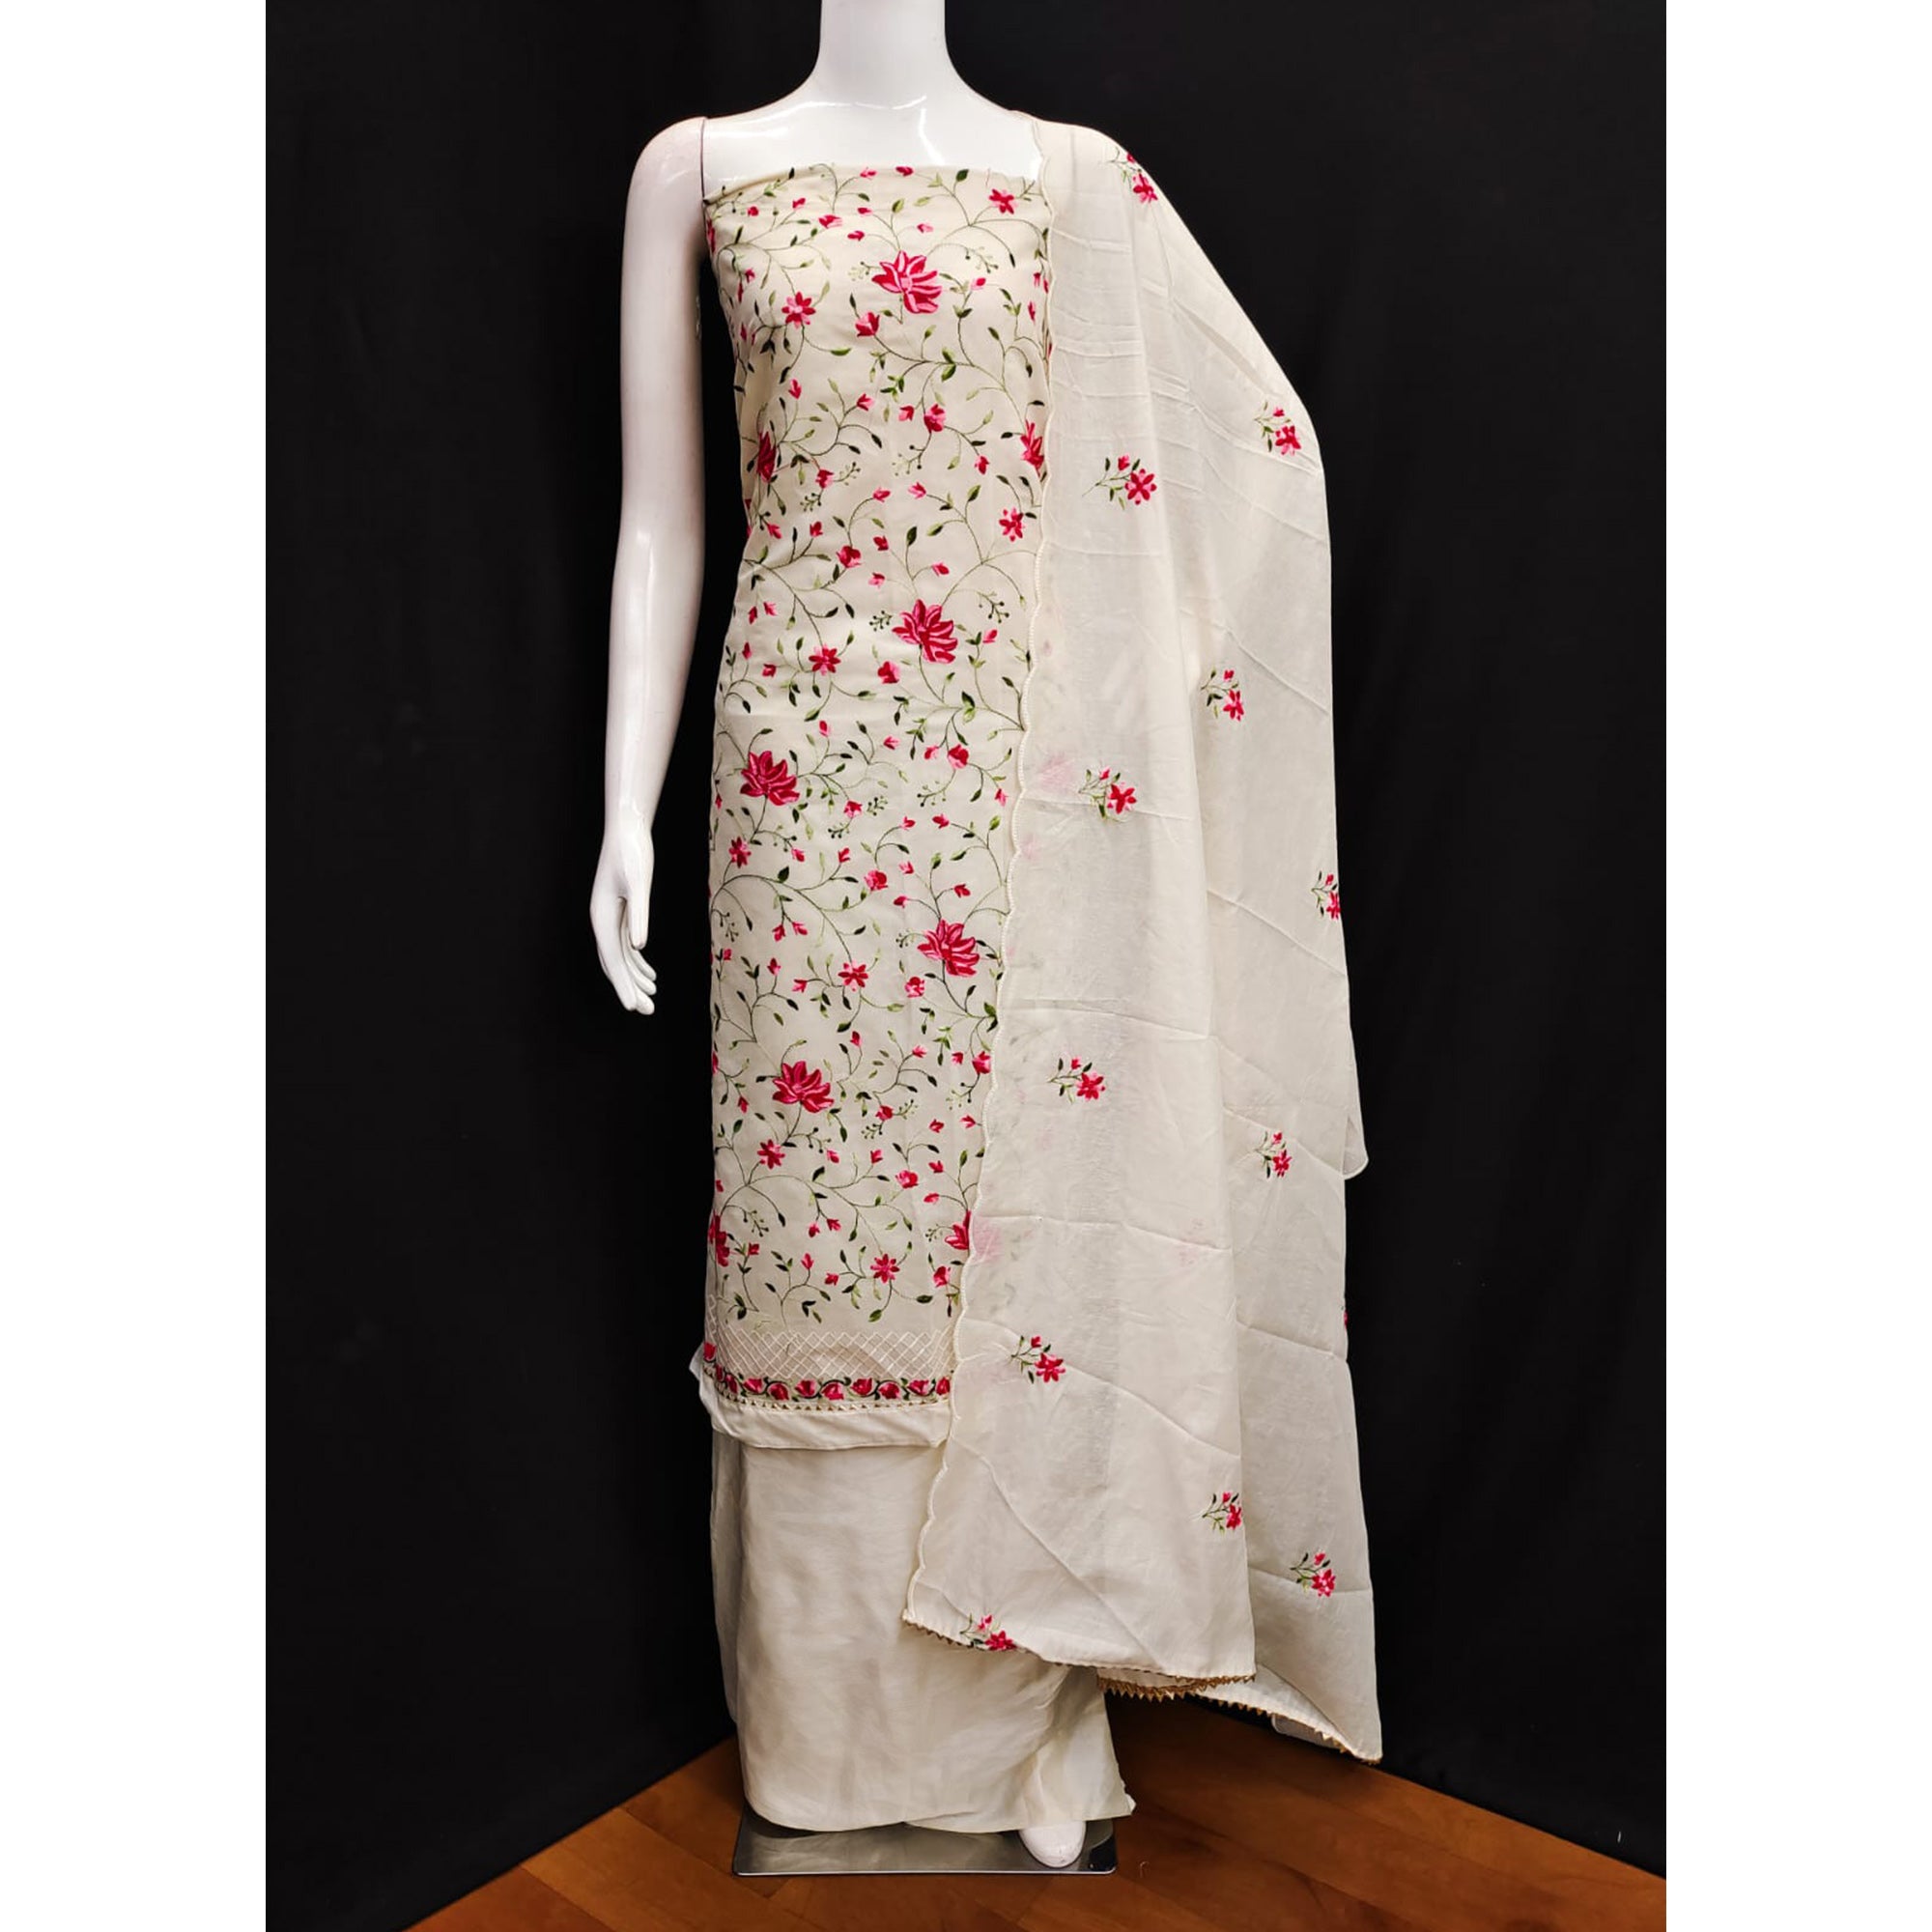 Off White & Pink Floral Embroidered Chanderi Silk Dress Material